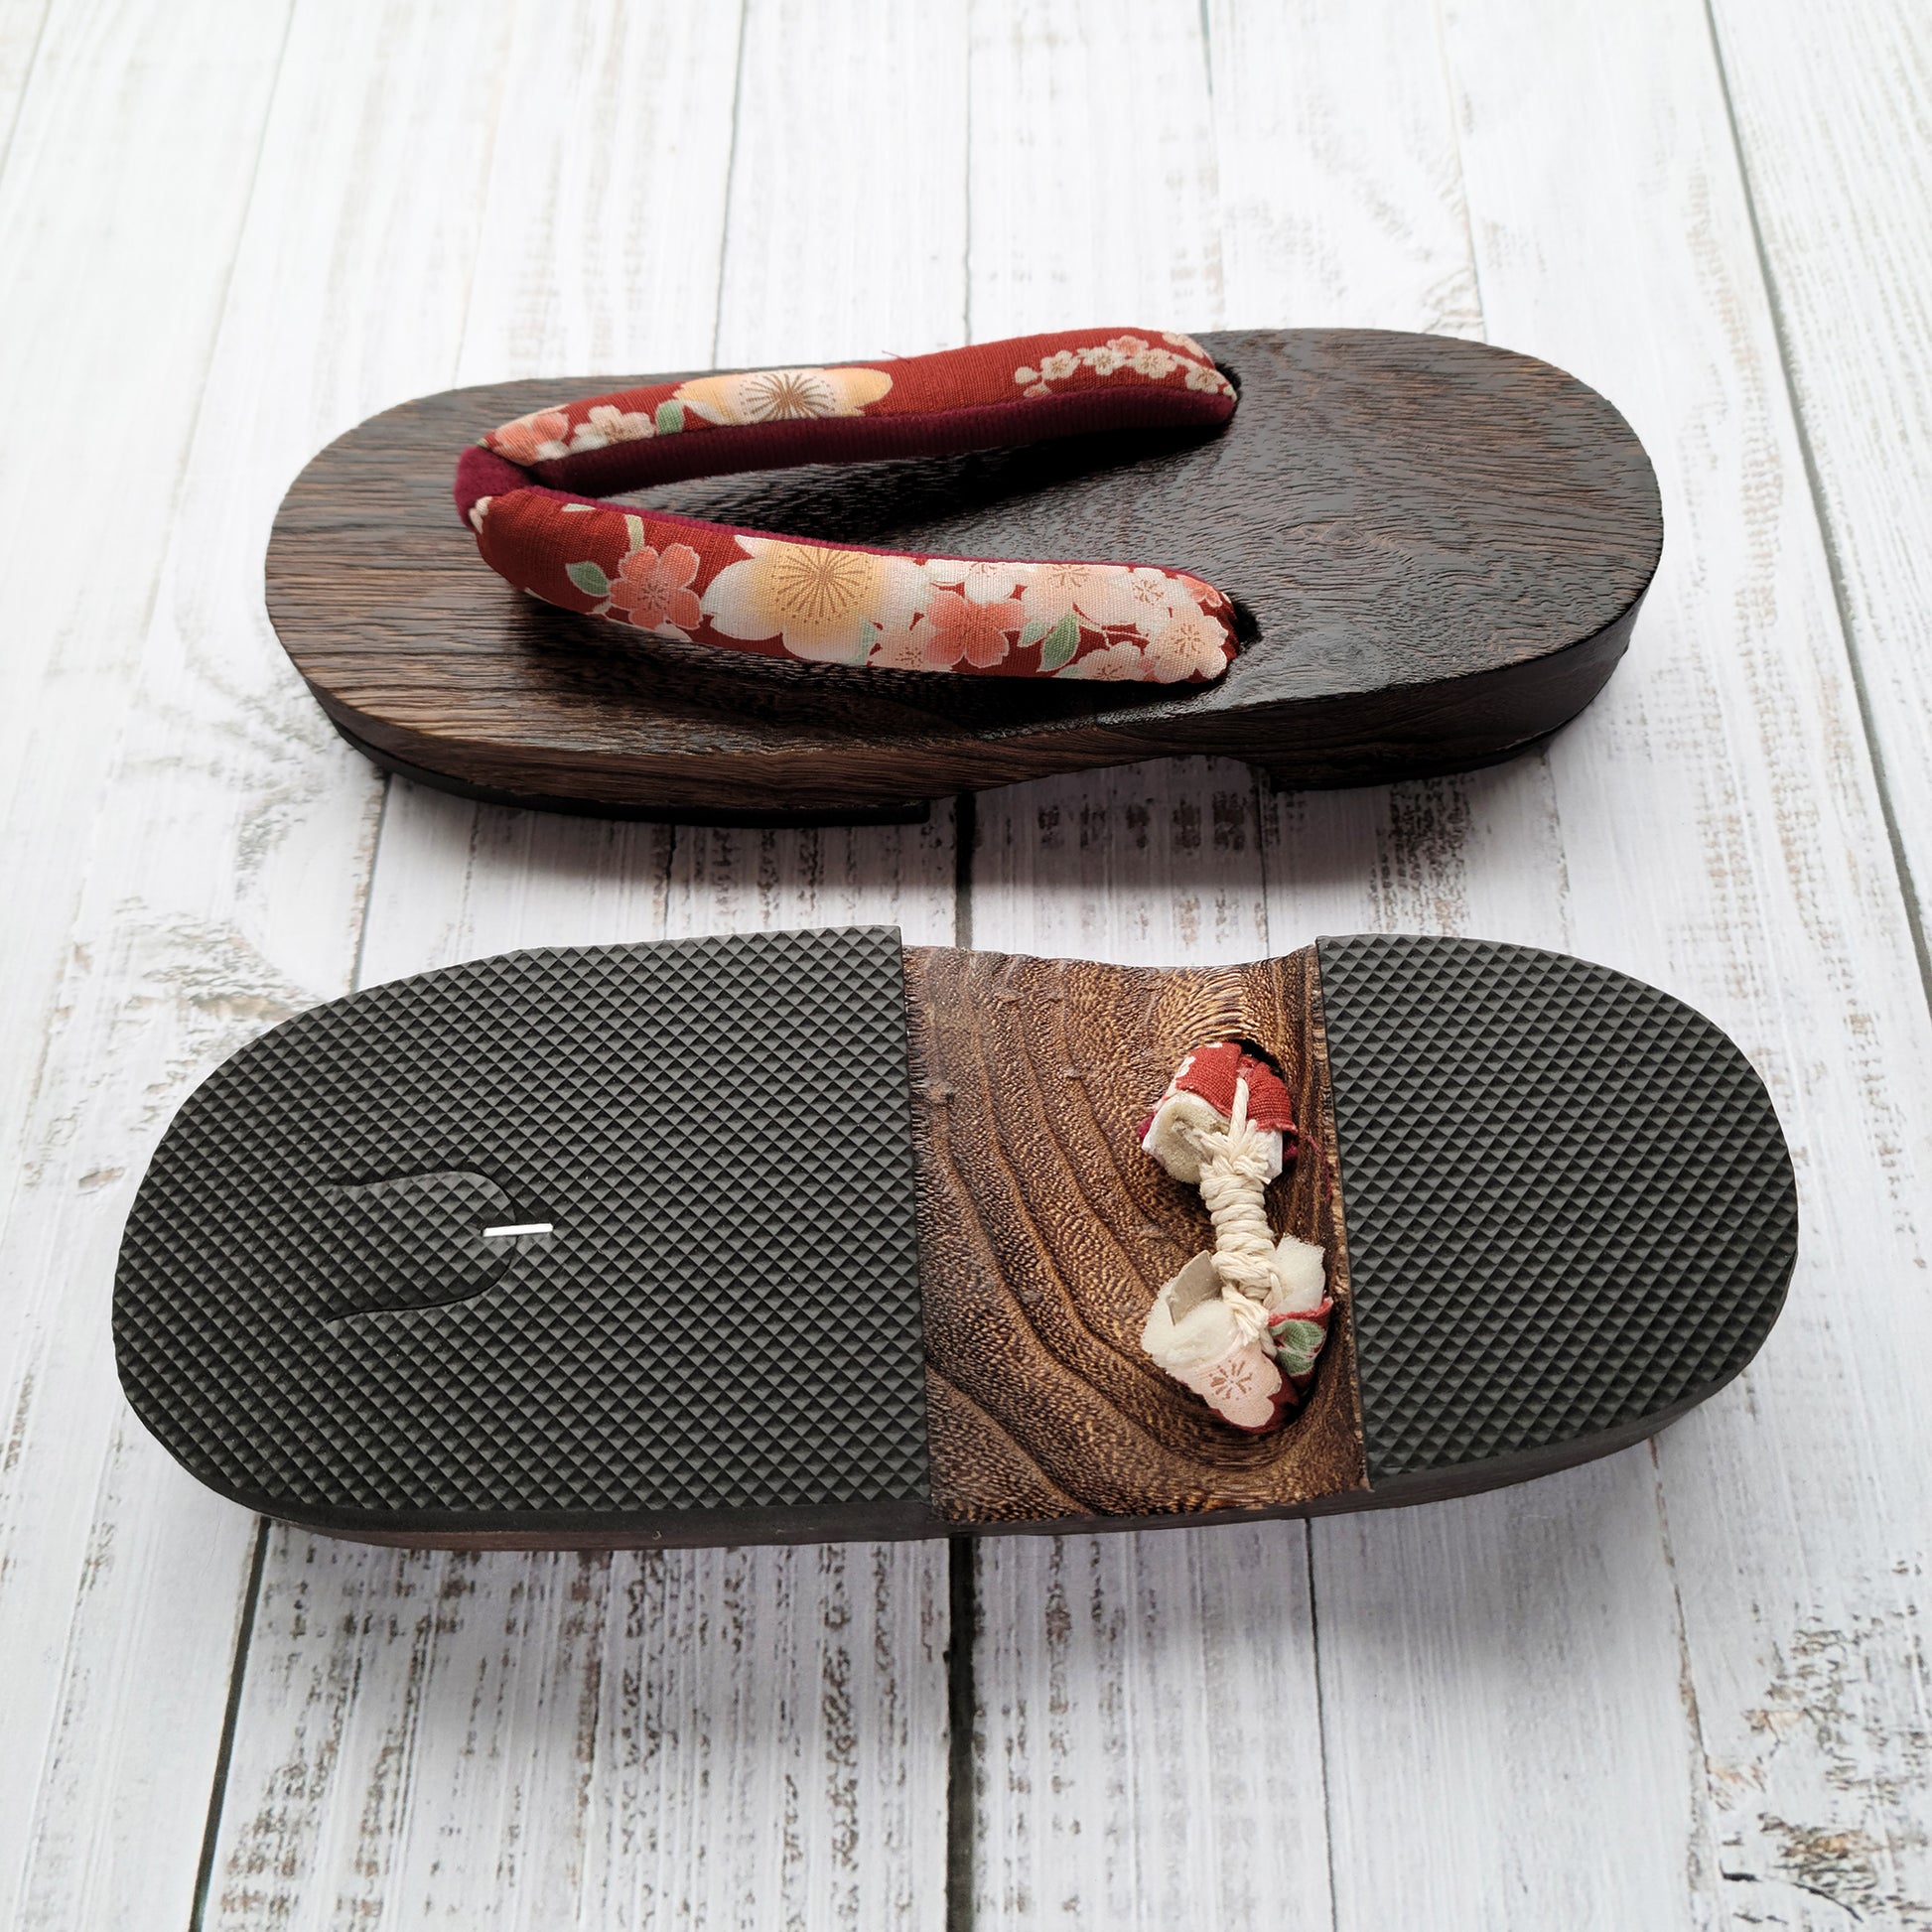 Geta Sandals for Women - Cherry Blossoms in Maroon